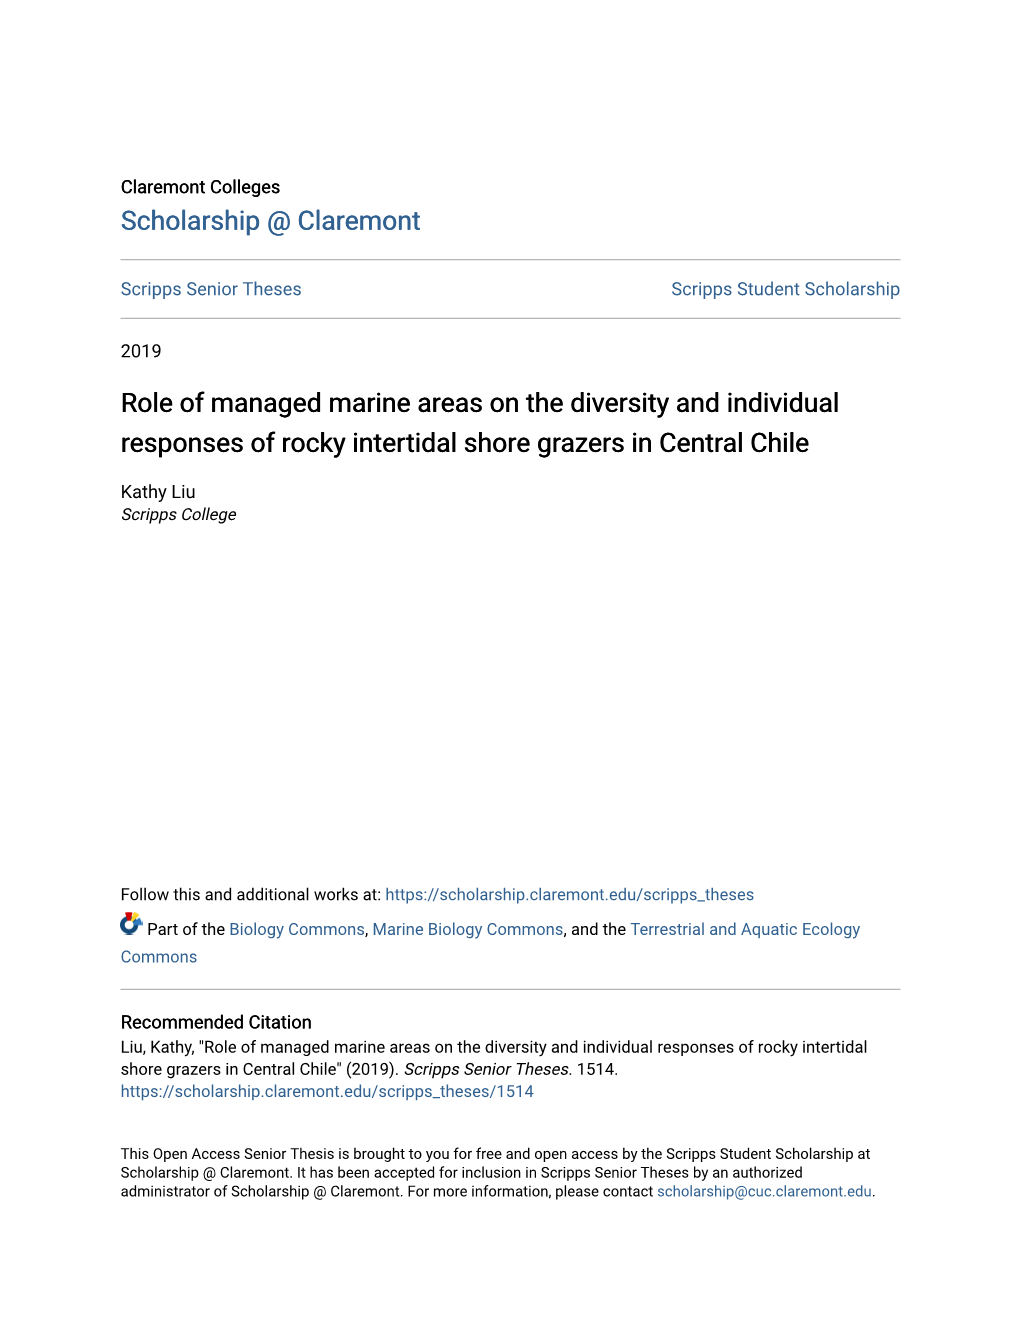 Role of Managed Marine Areas on the Diversity and Individual Responses of Rocky Intertidal Shore Grazers in Central Chile